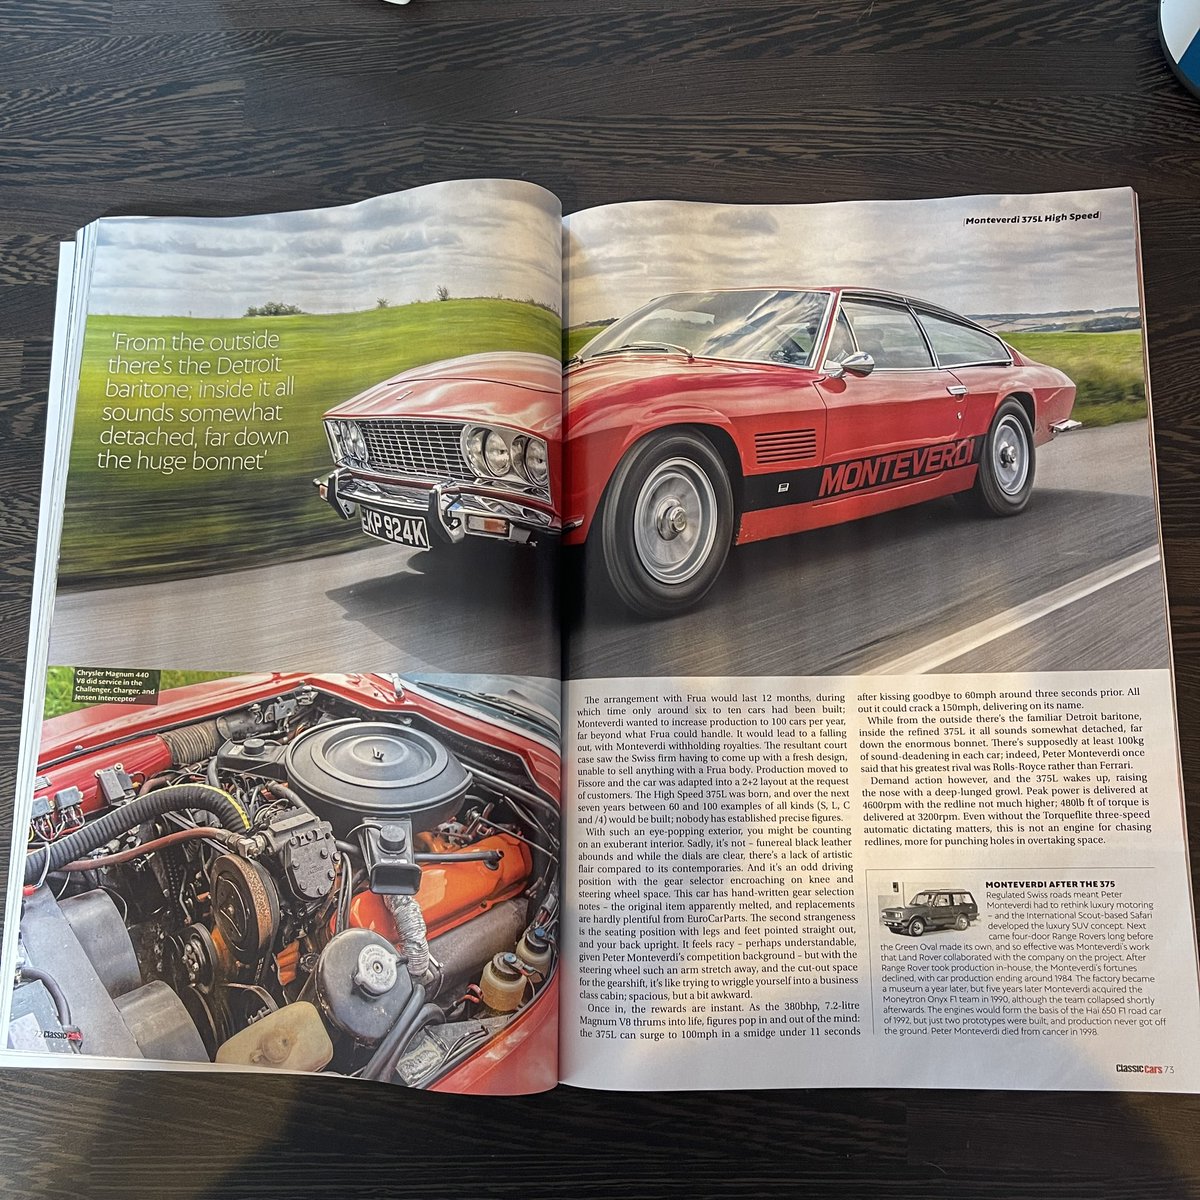 New work from me for Classic Cars magazine, driving the magnificent Monteverdi High Speed. Thanks to all involved and @ISkelphoto on lens duty. This or a Maserati Ghibli, Ferrari Daytona, Jensen Interceptor or Aston DB?